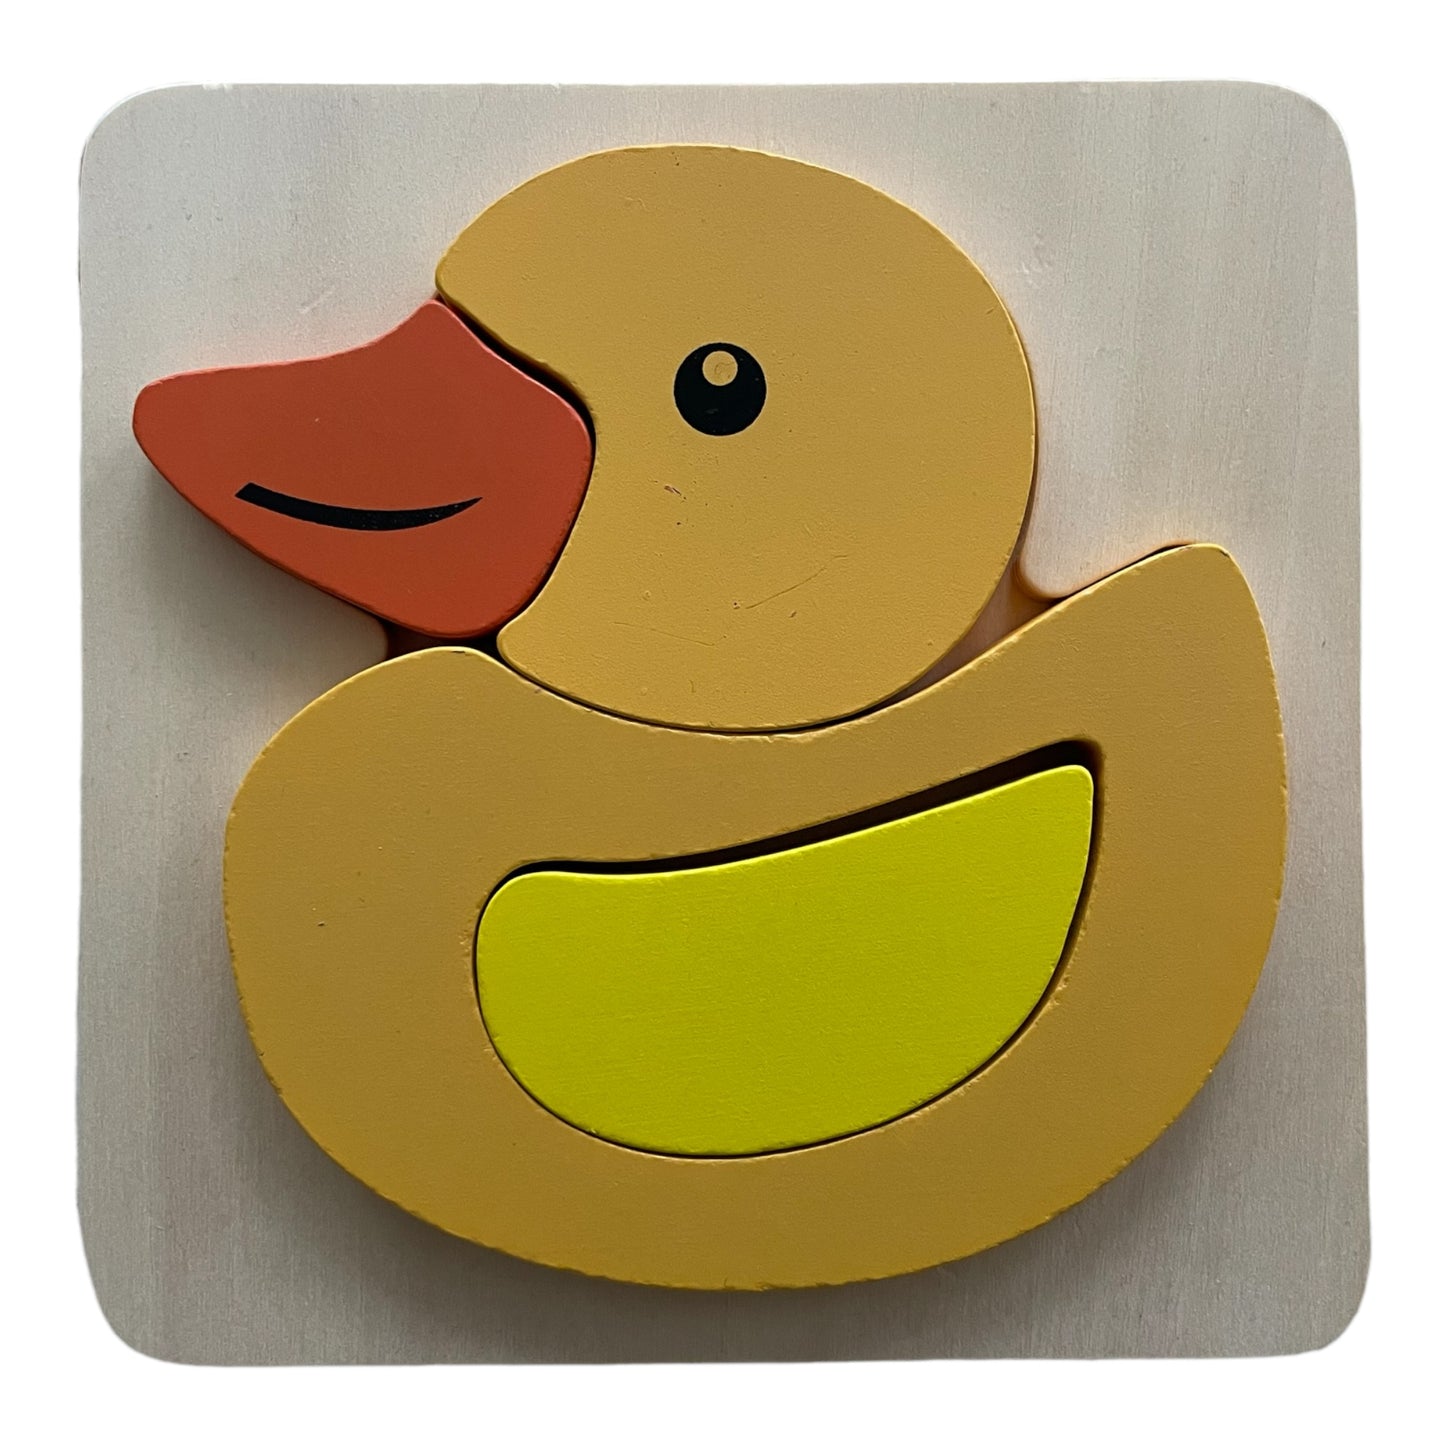 Wooden puzzle 3 items (duck, whale, elephant)